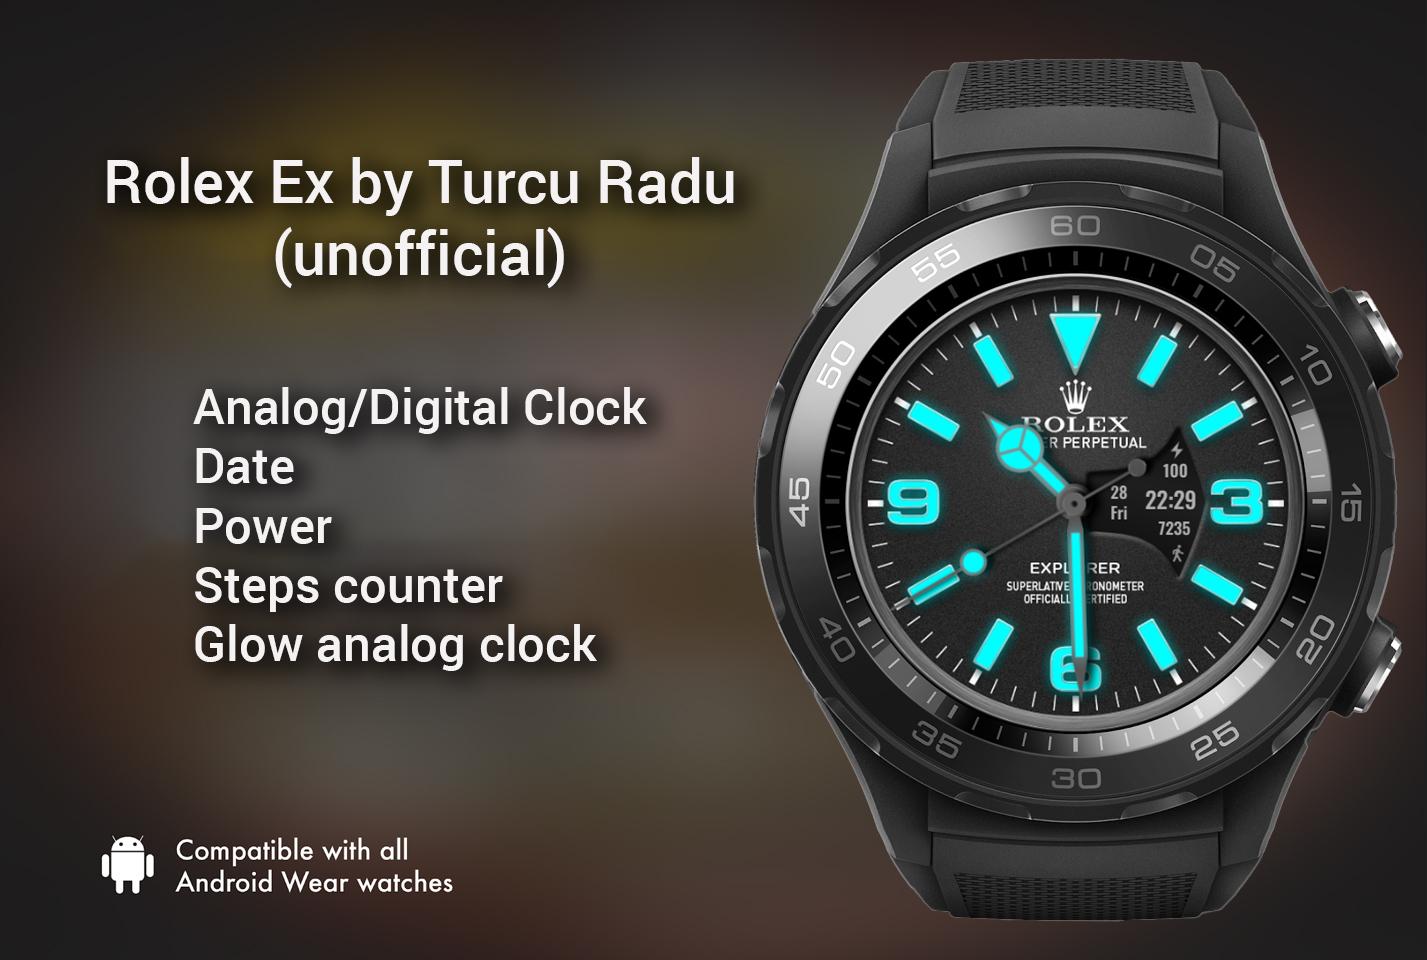 Rolex Ex Watchface Version for Android